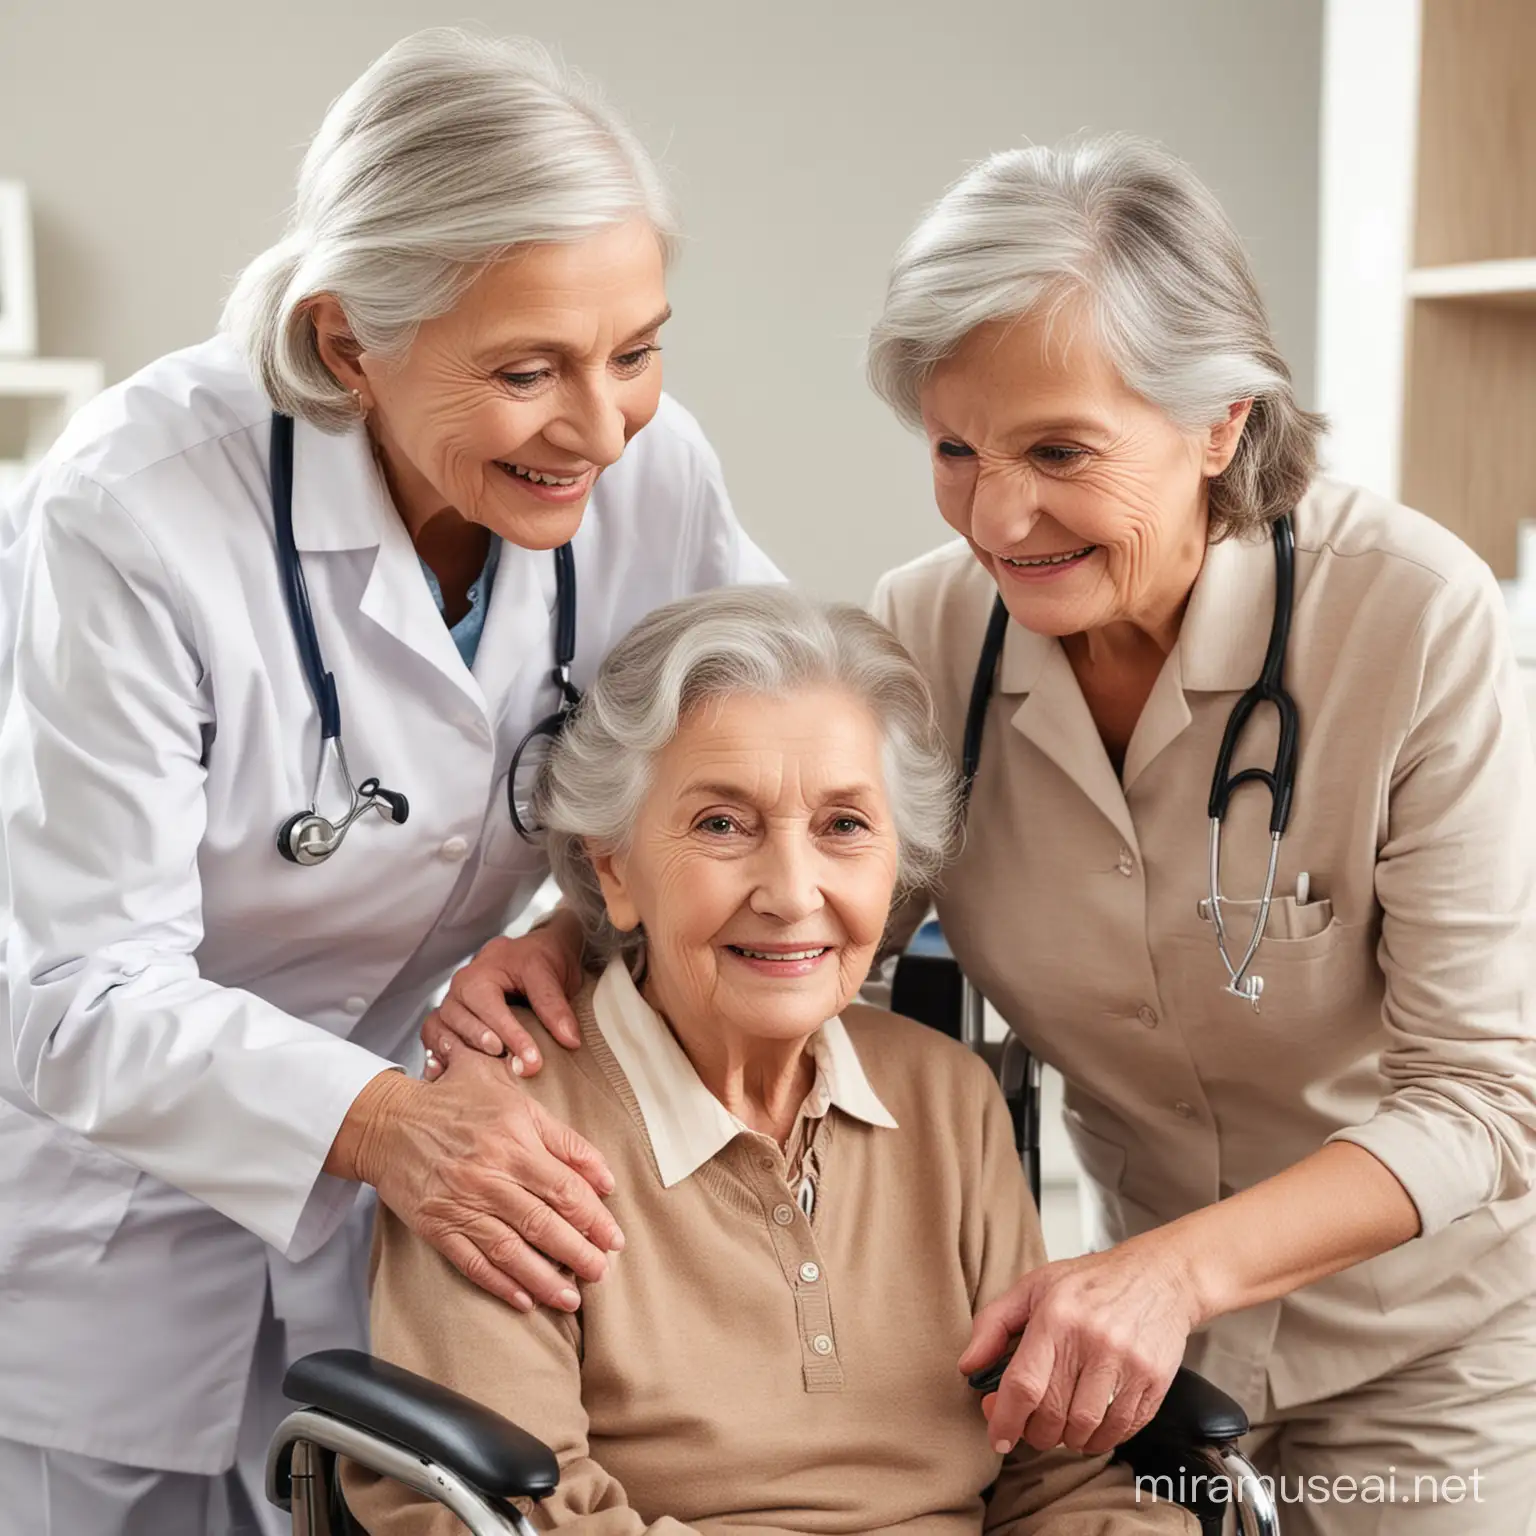 Elderly Individuals Receiving Home Medical Assistance